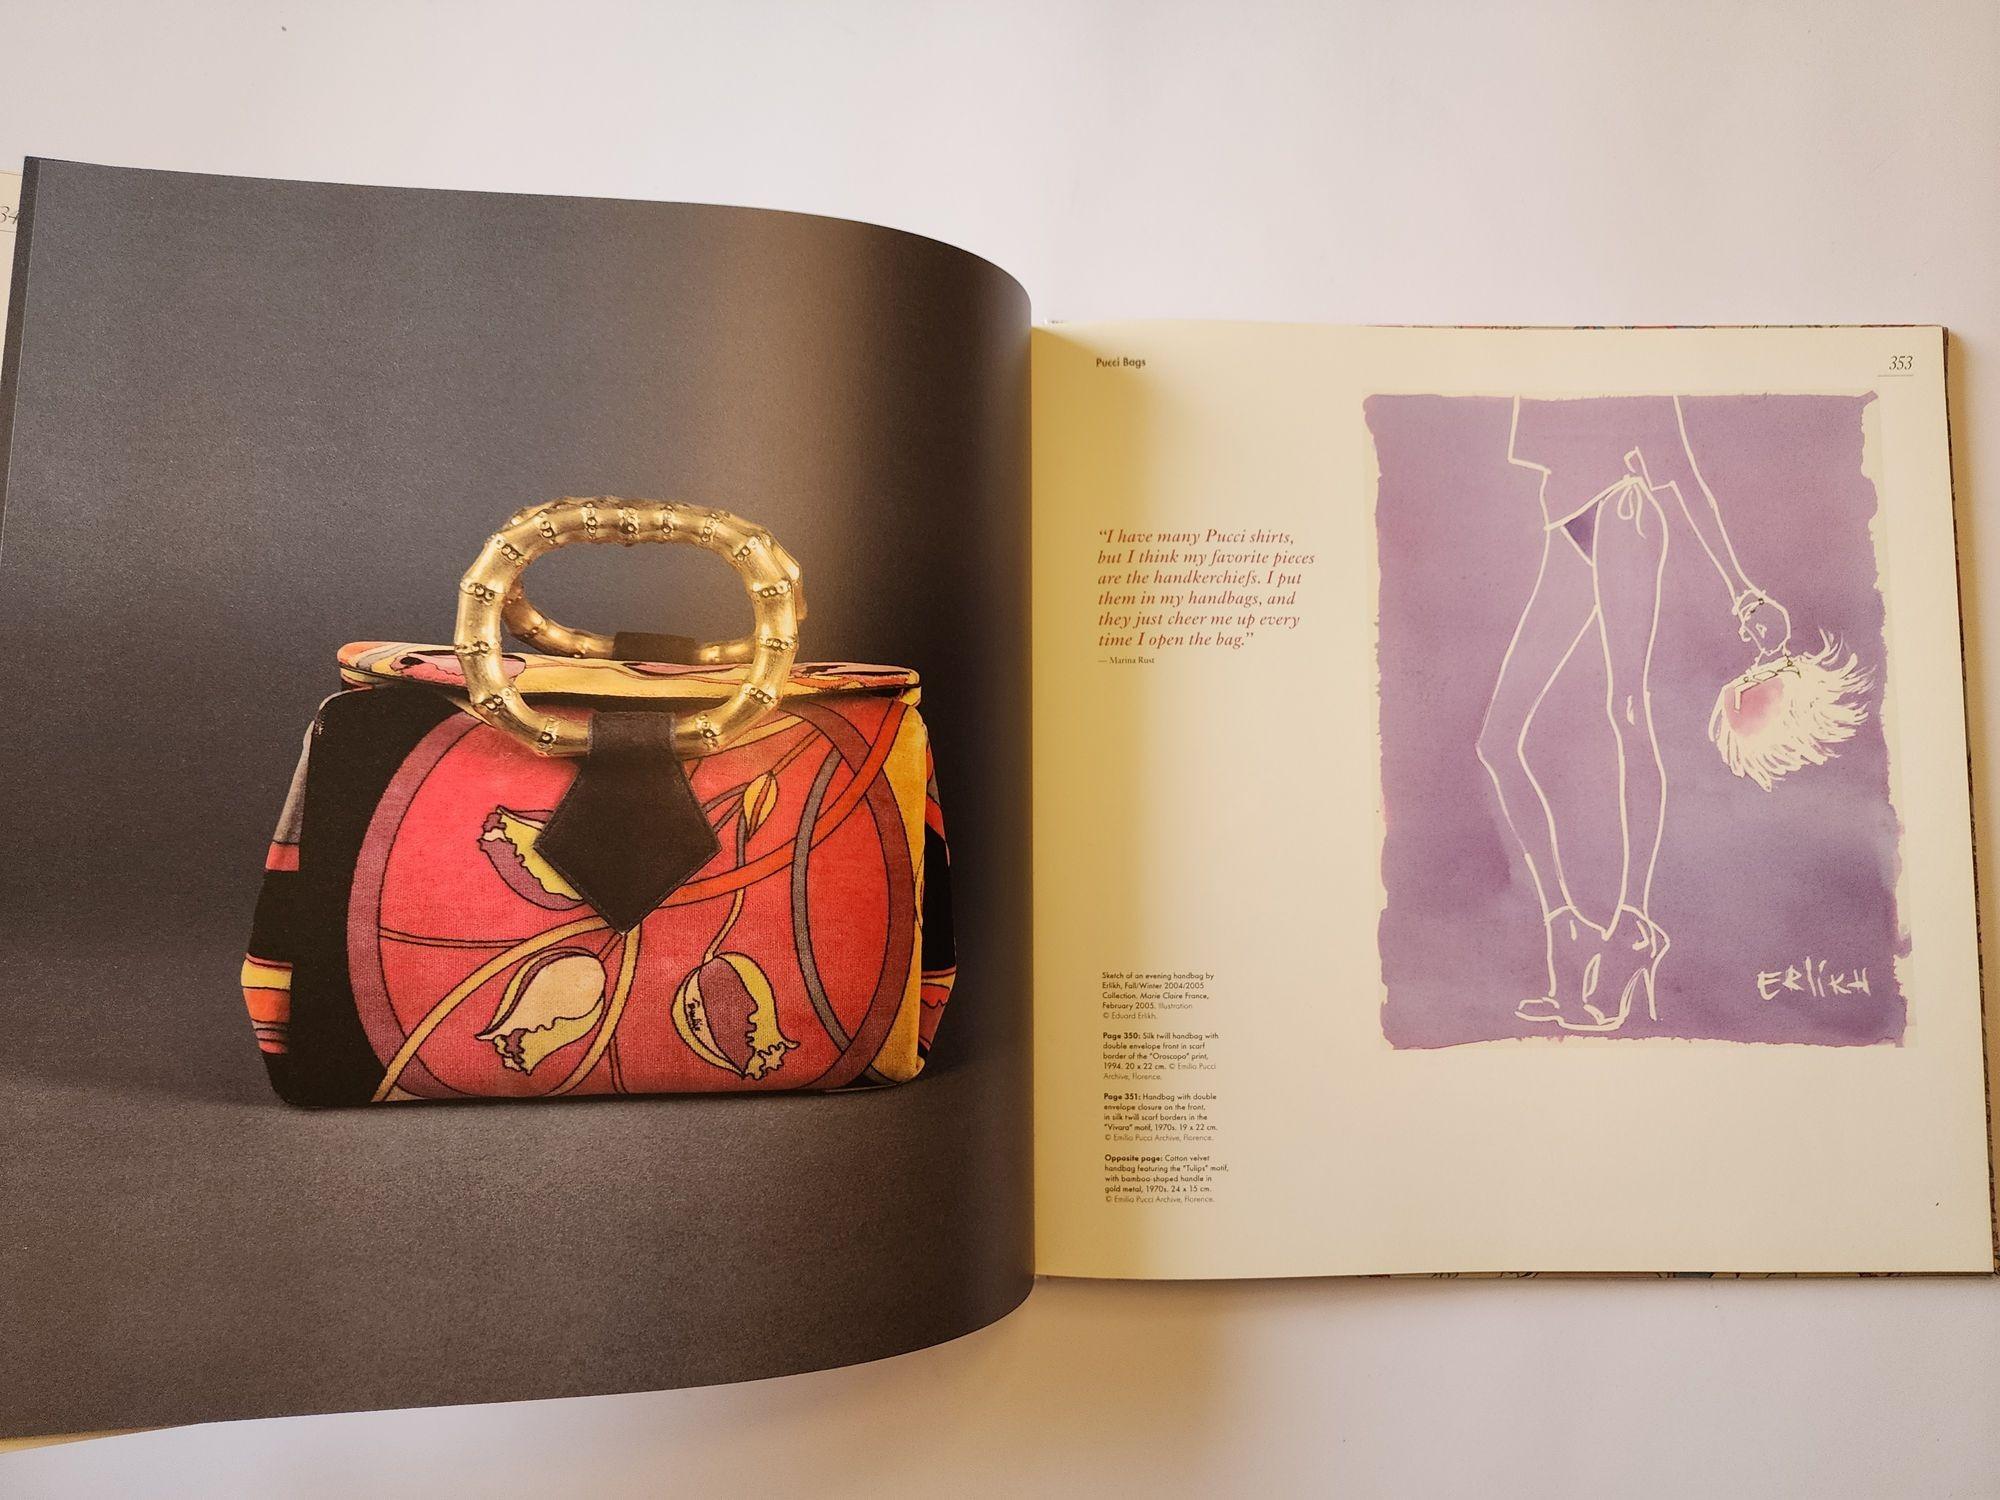 Hand-Crafted Emilio Pucci Fashion Story Oversized Book by Vanessa Friedman Taschen 2010 For Sale